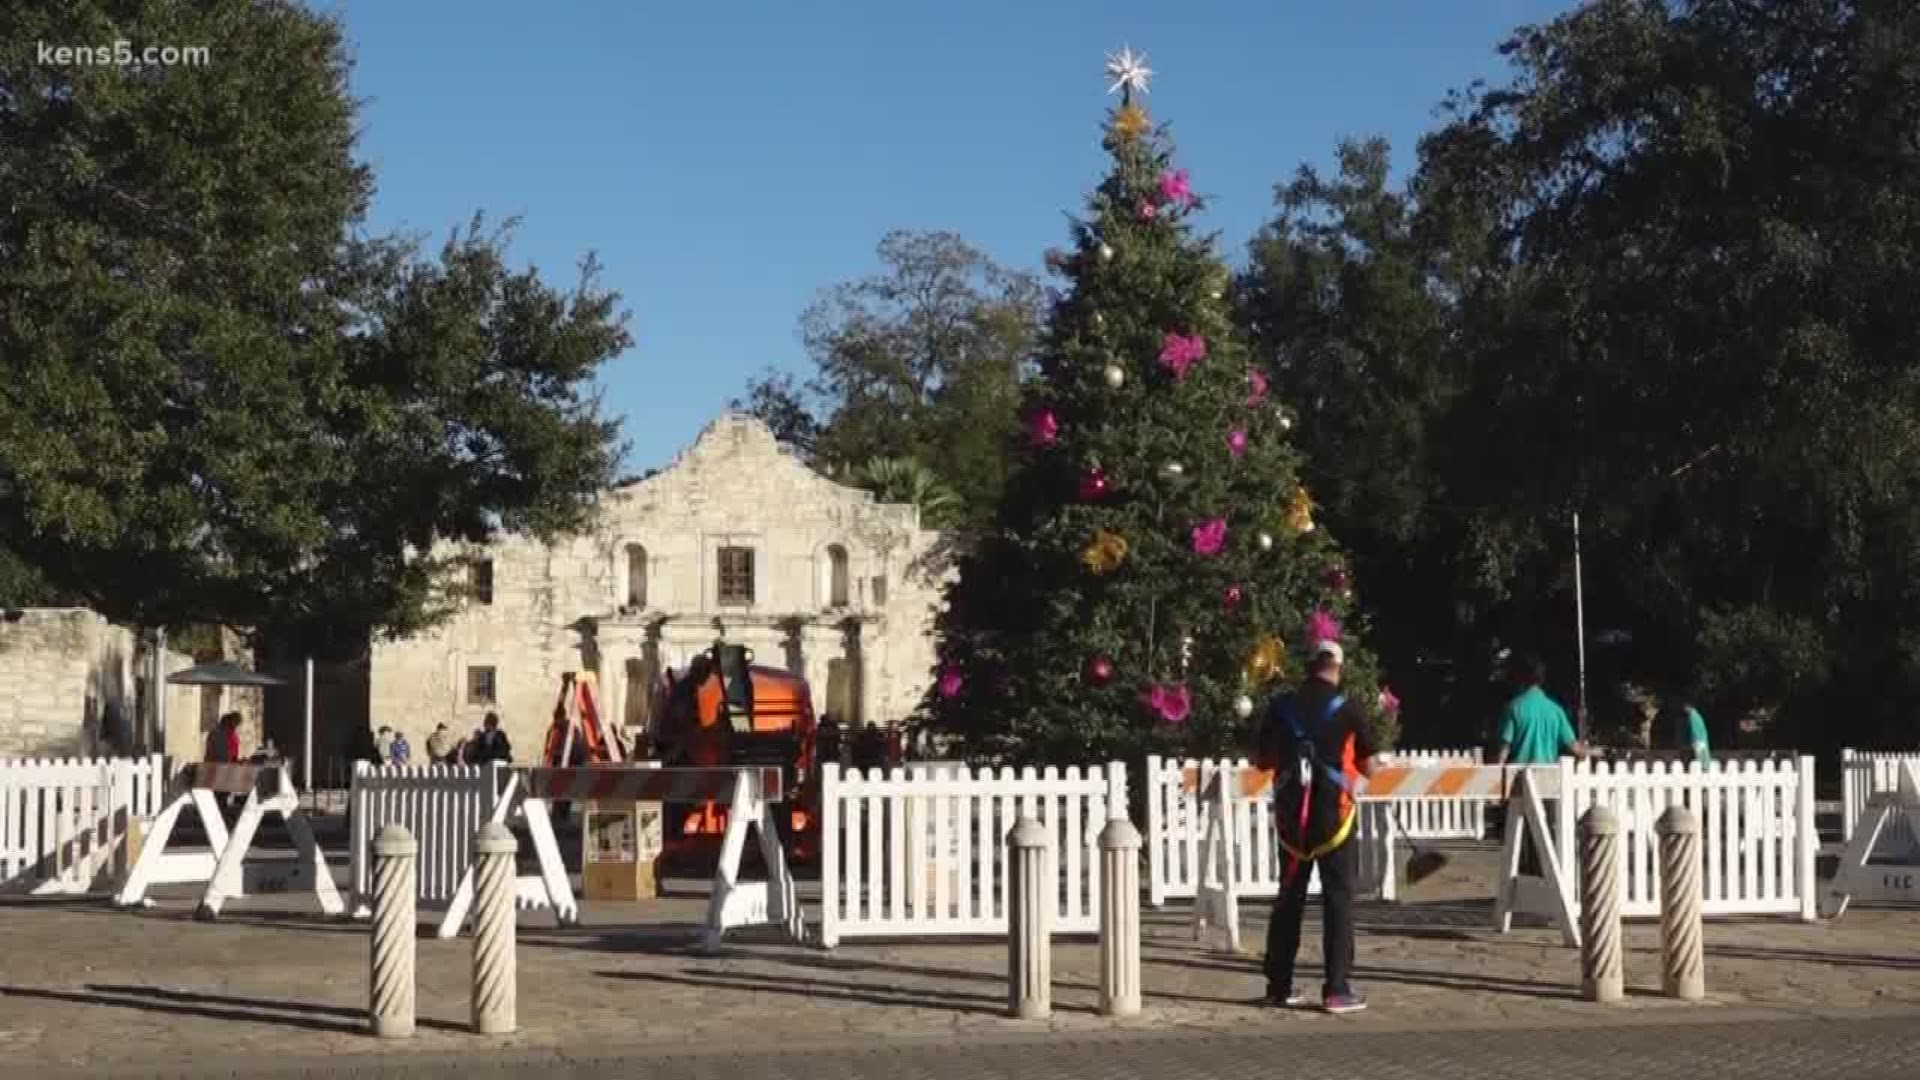 Some locals are upset that San Antonio's official Christmas tree is standing at Travis Park instead. Eyewitness News reporter Adi Guajardo joins us live at Alamo Plaza.